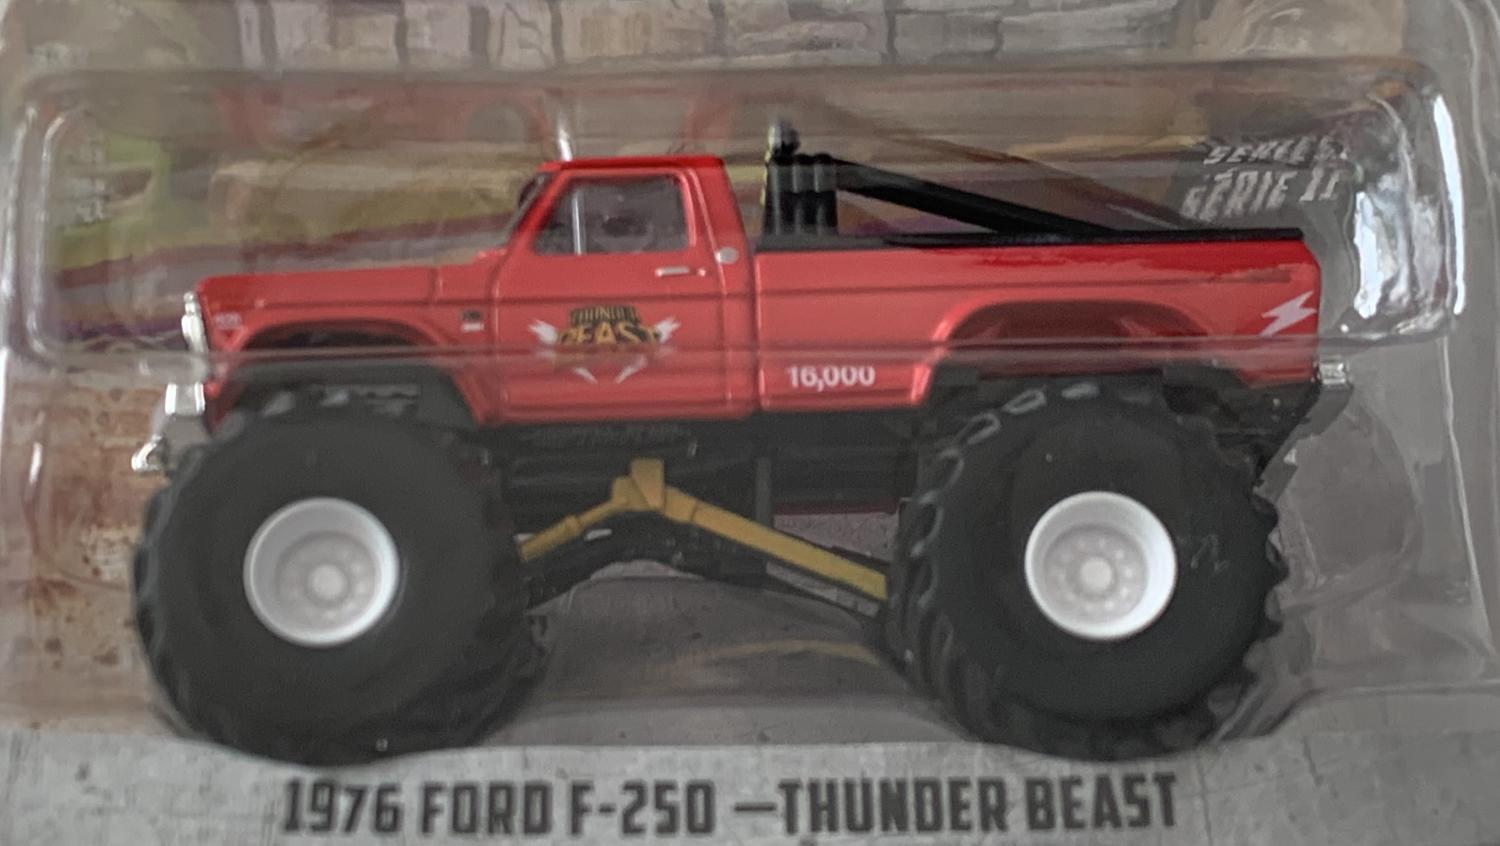 Kings of Crunch Monster Truck series 11, 1976 Ford F-250 Thunder Beast, 1:64 scale diecast model from Greenlight, limited edition model